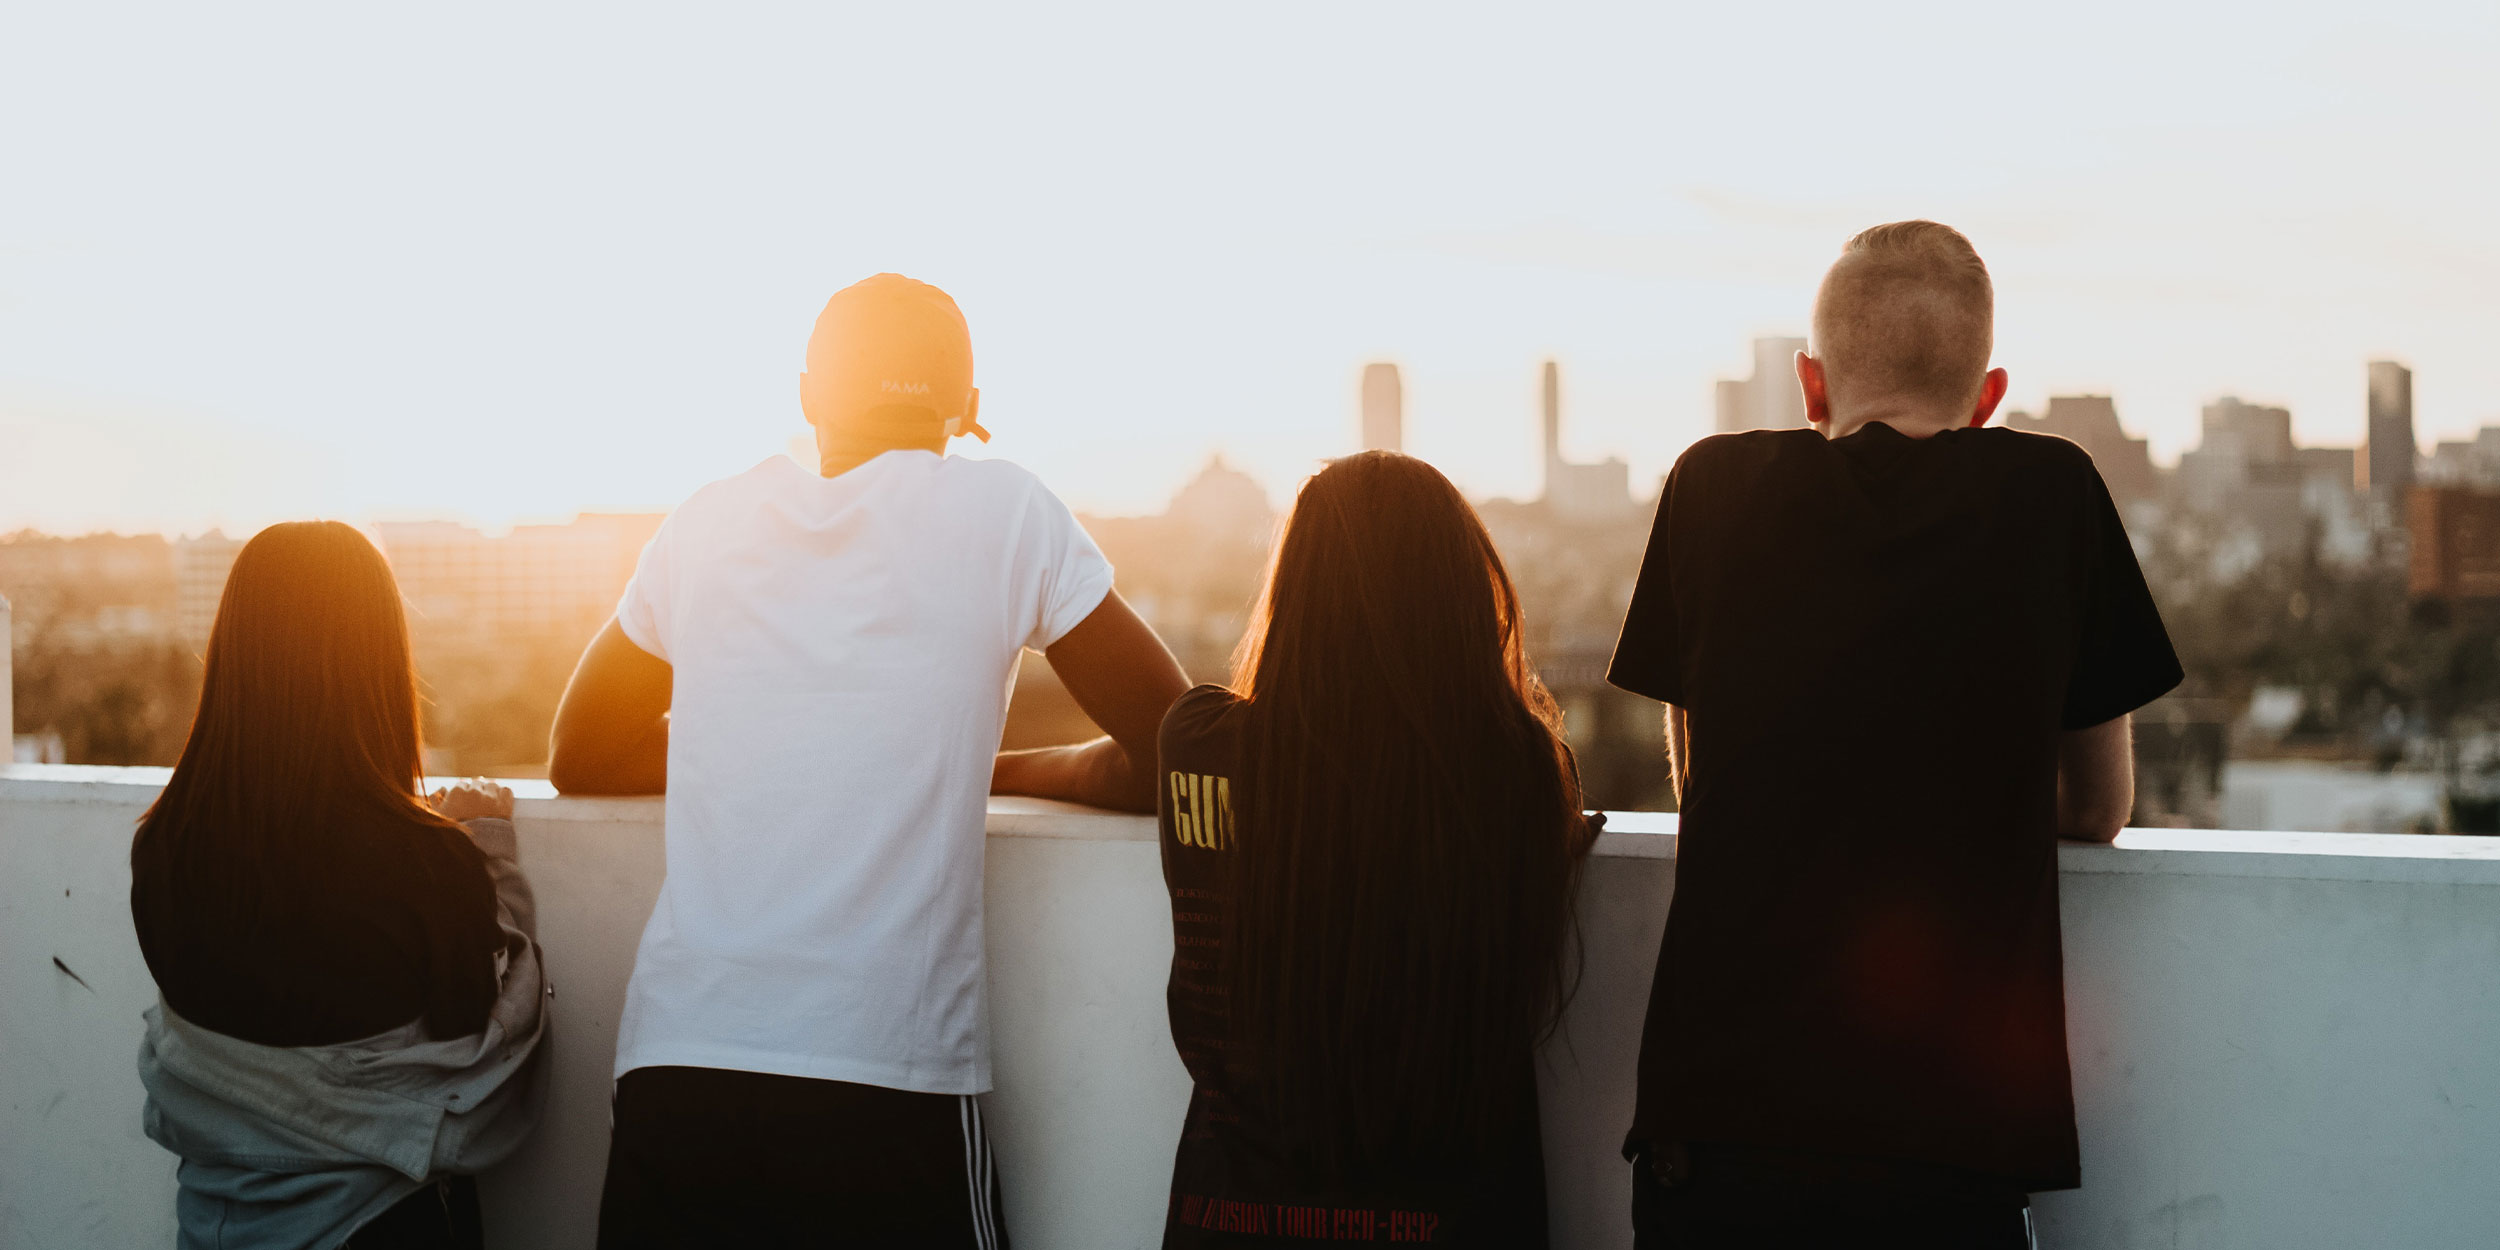 4 people looking at a skyline